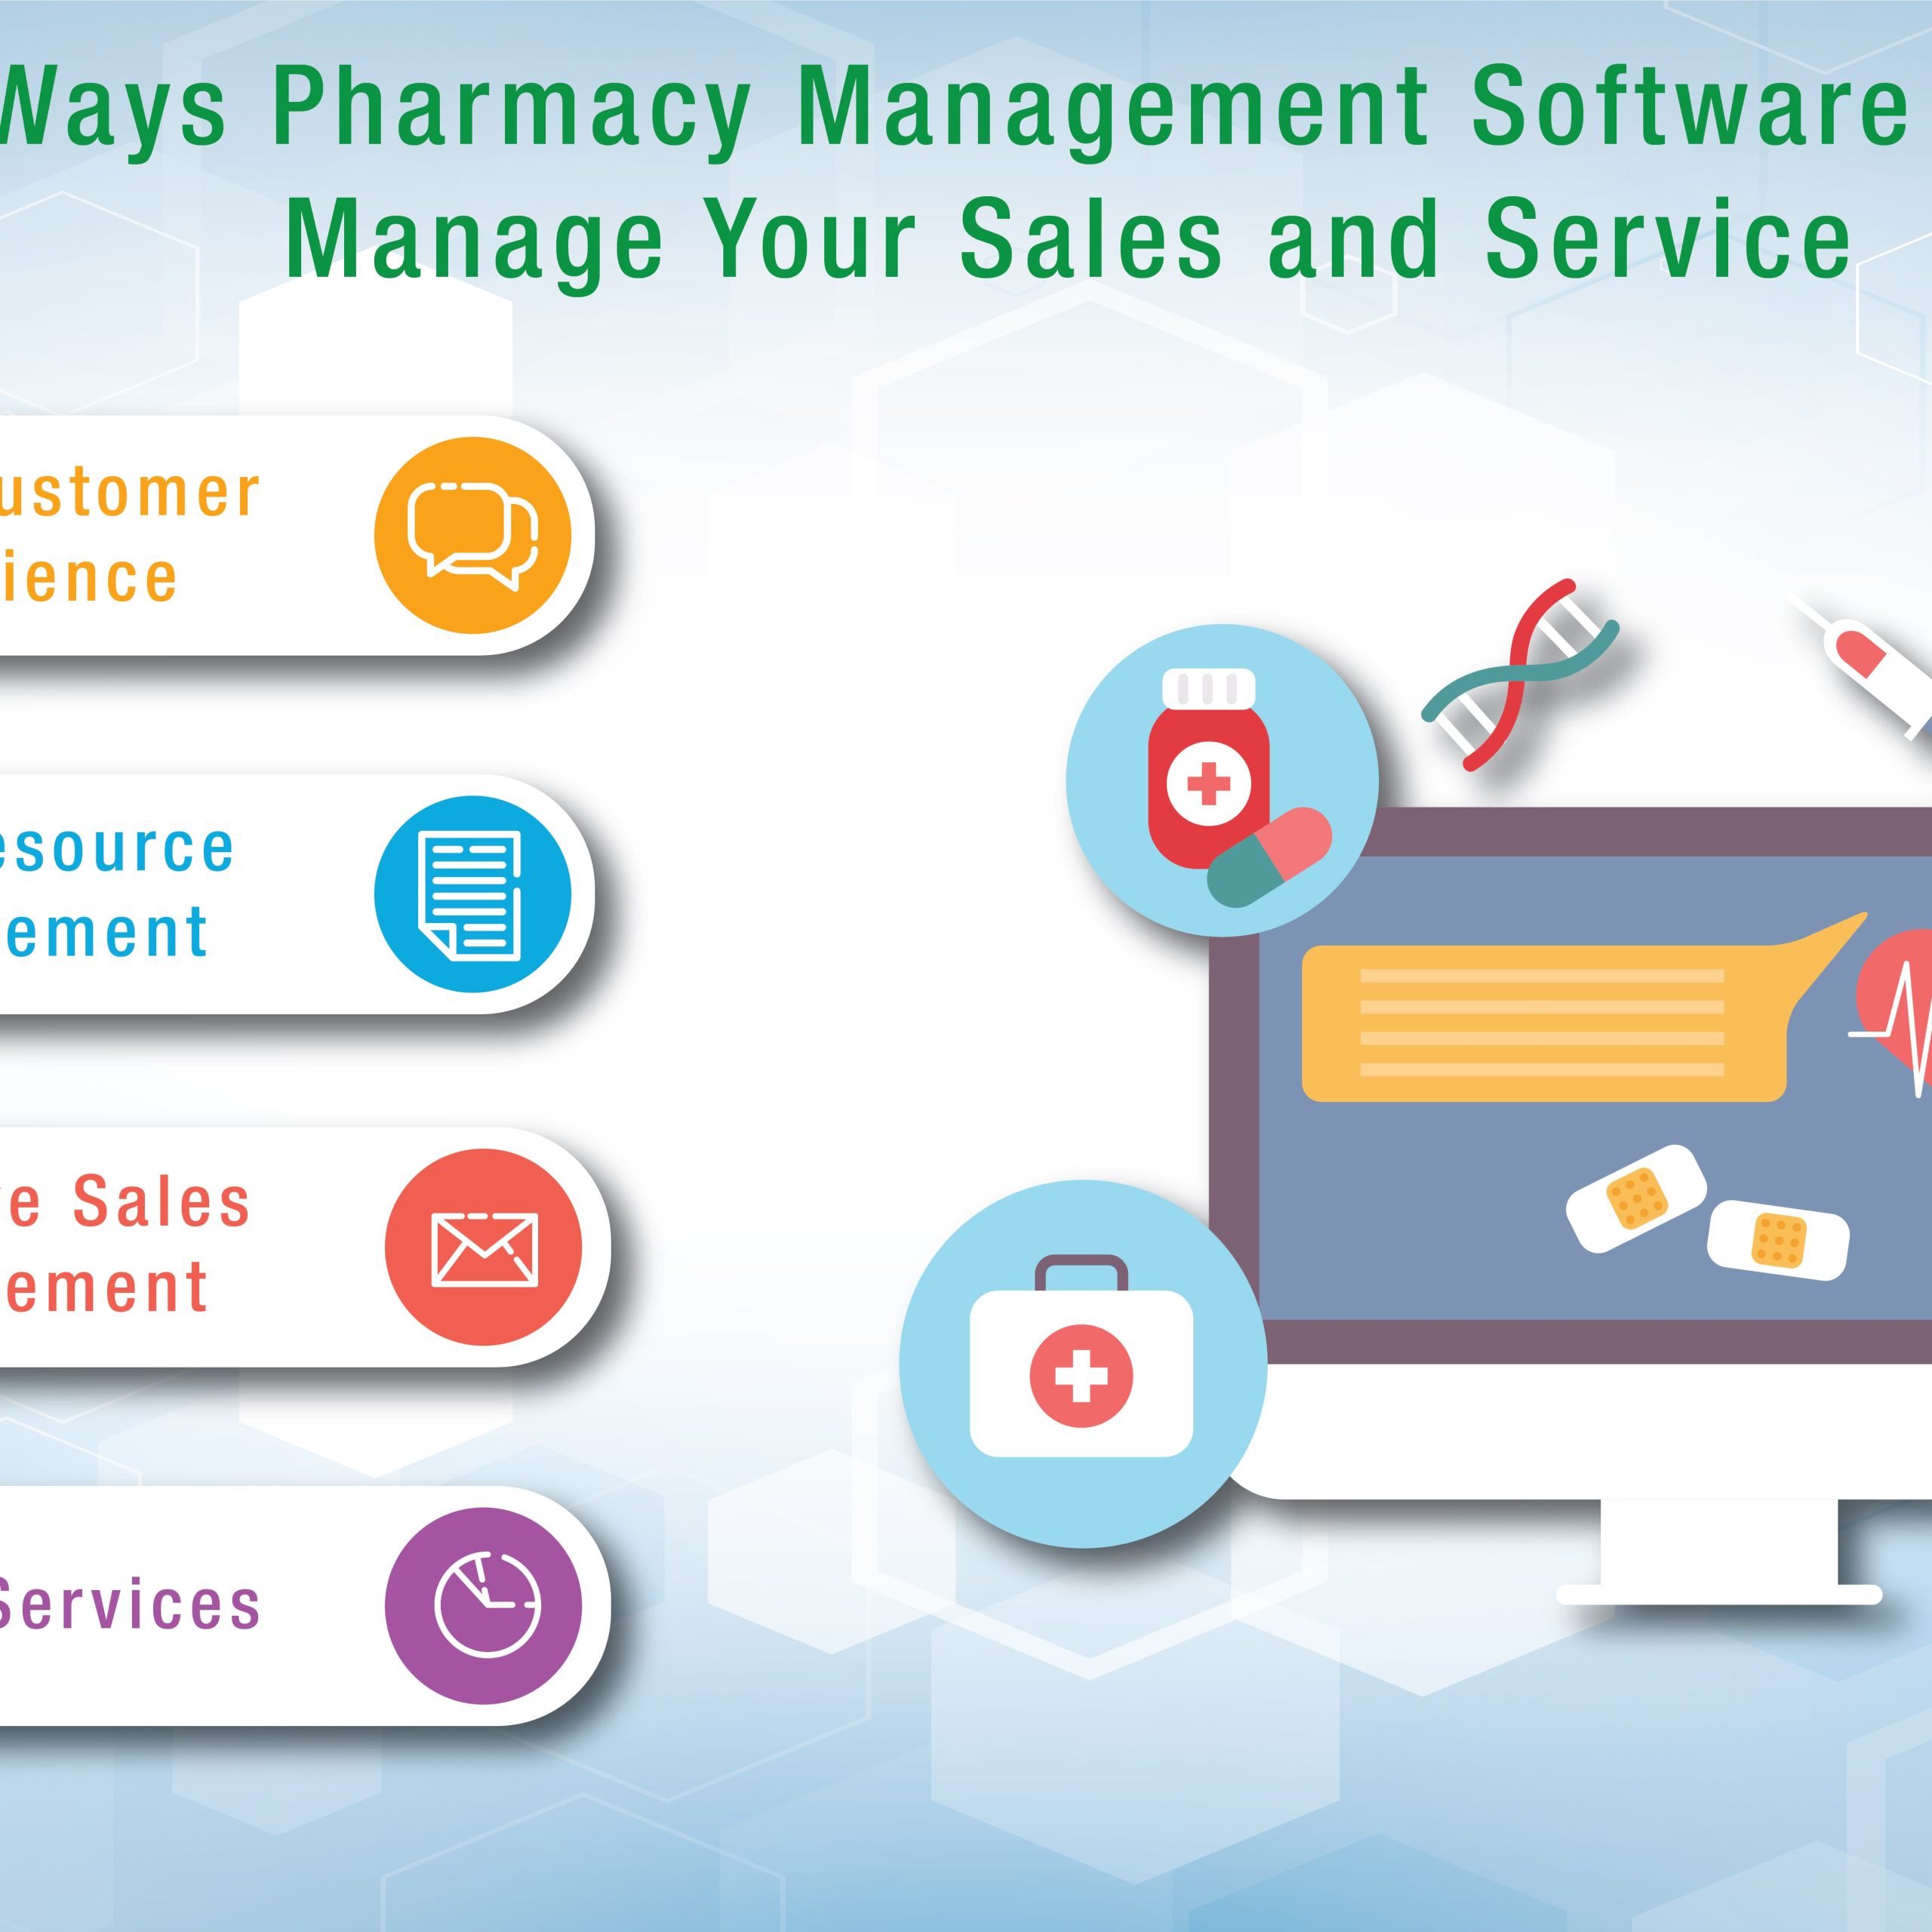 4 Ways Pharmacy Management Software Helps Manage Your Sales and Service